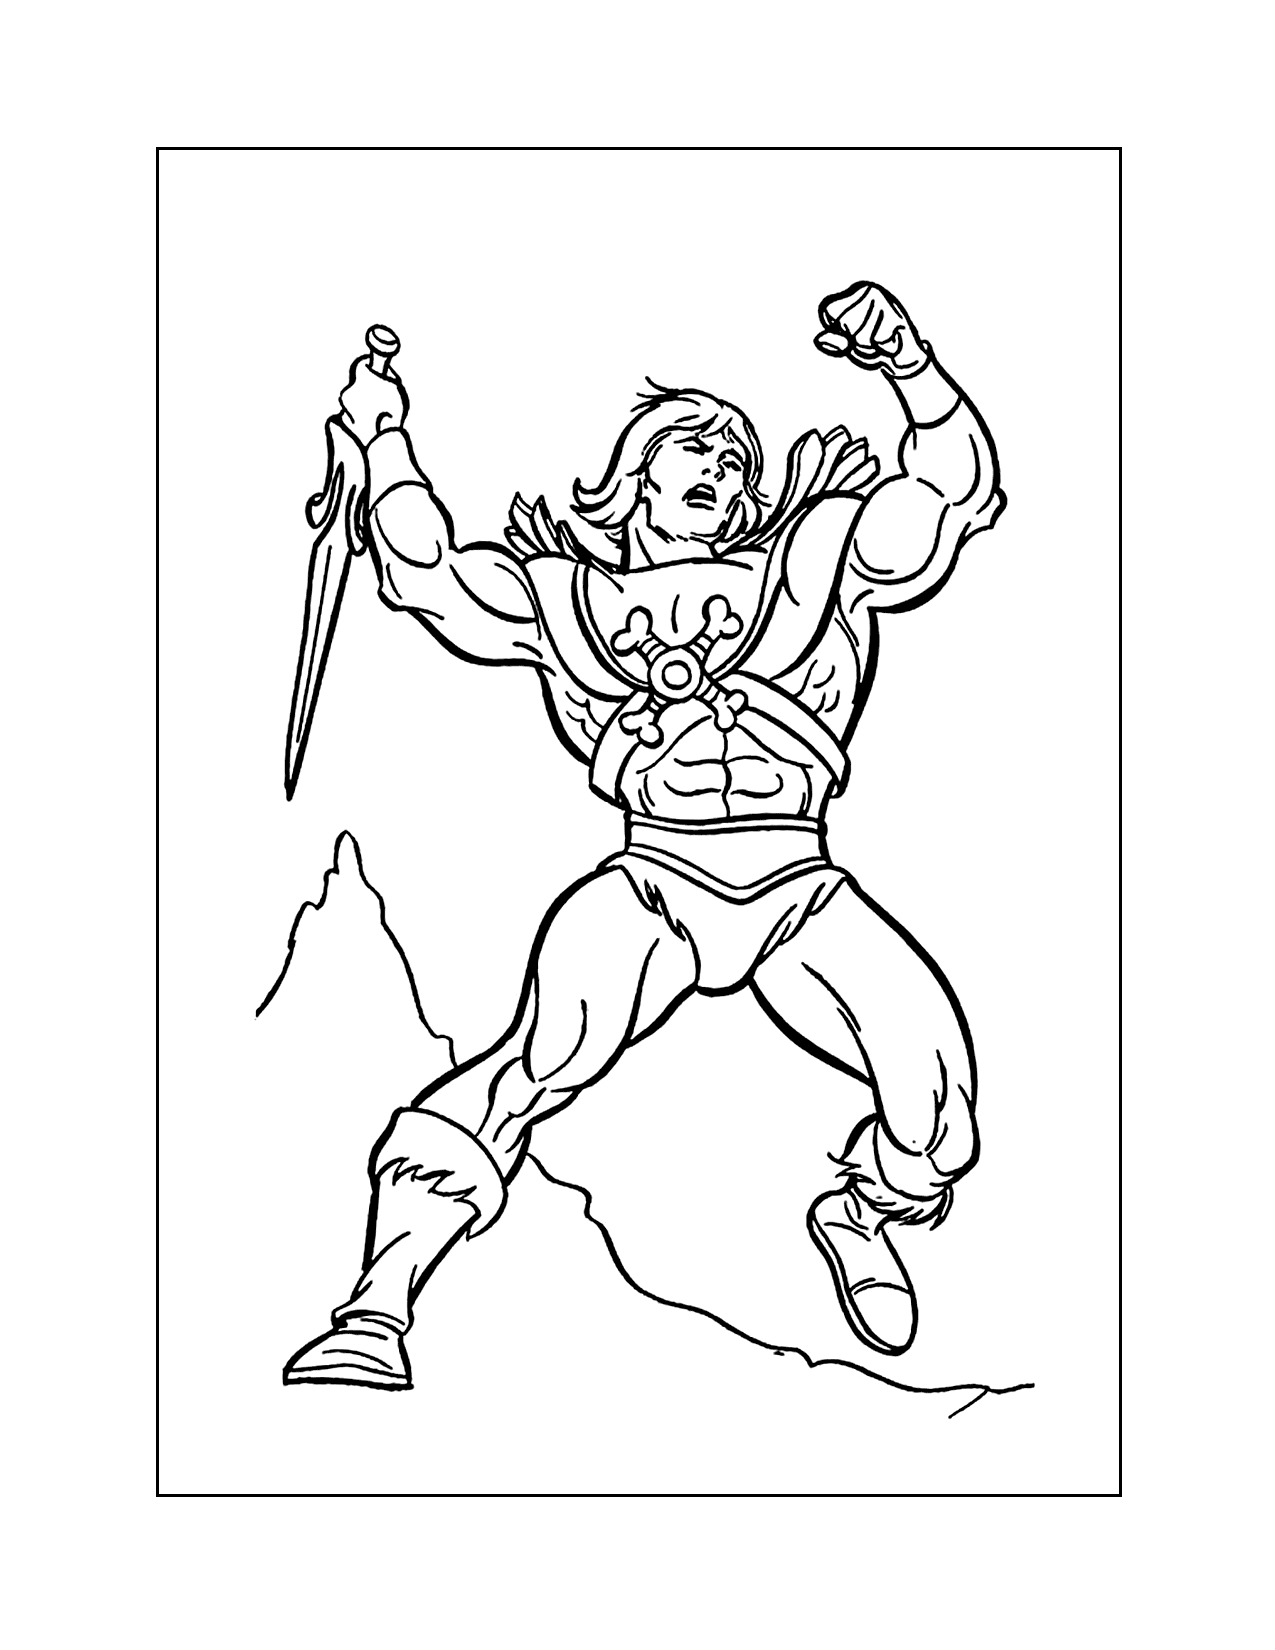 He Man Fighting With Sword Coloring Page